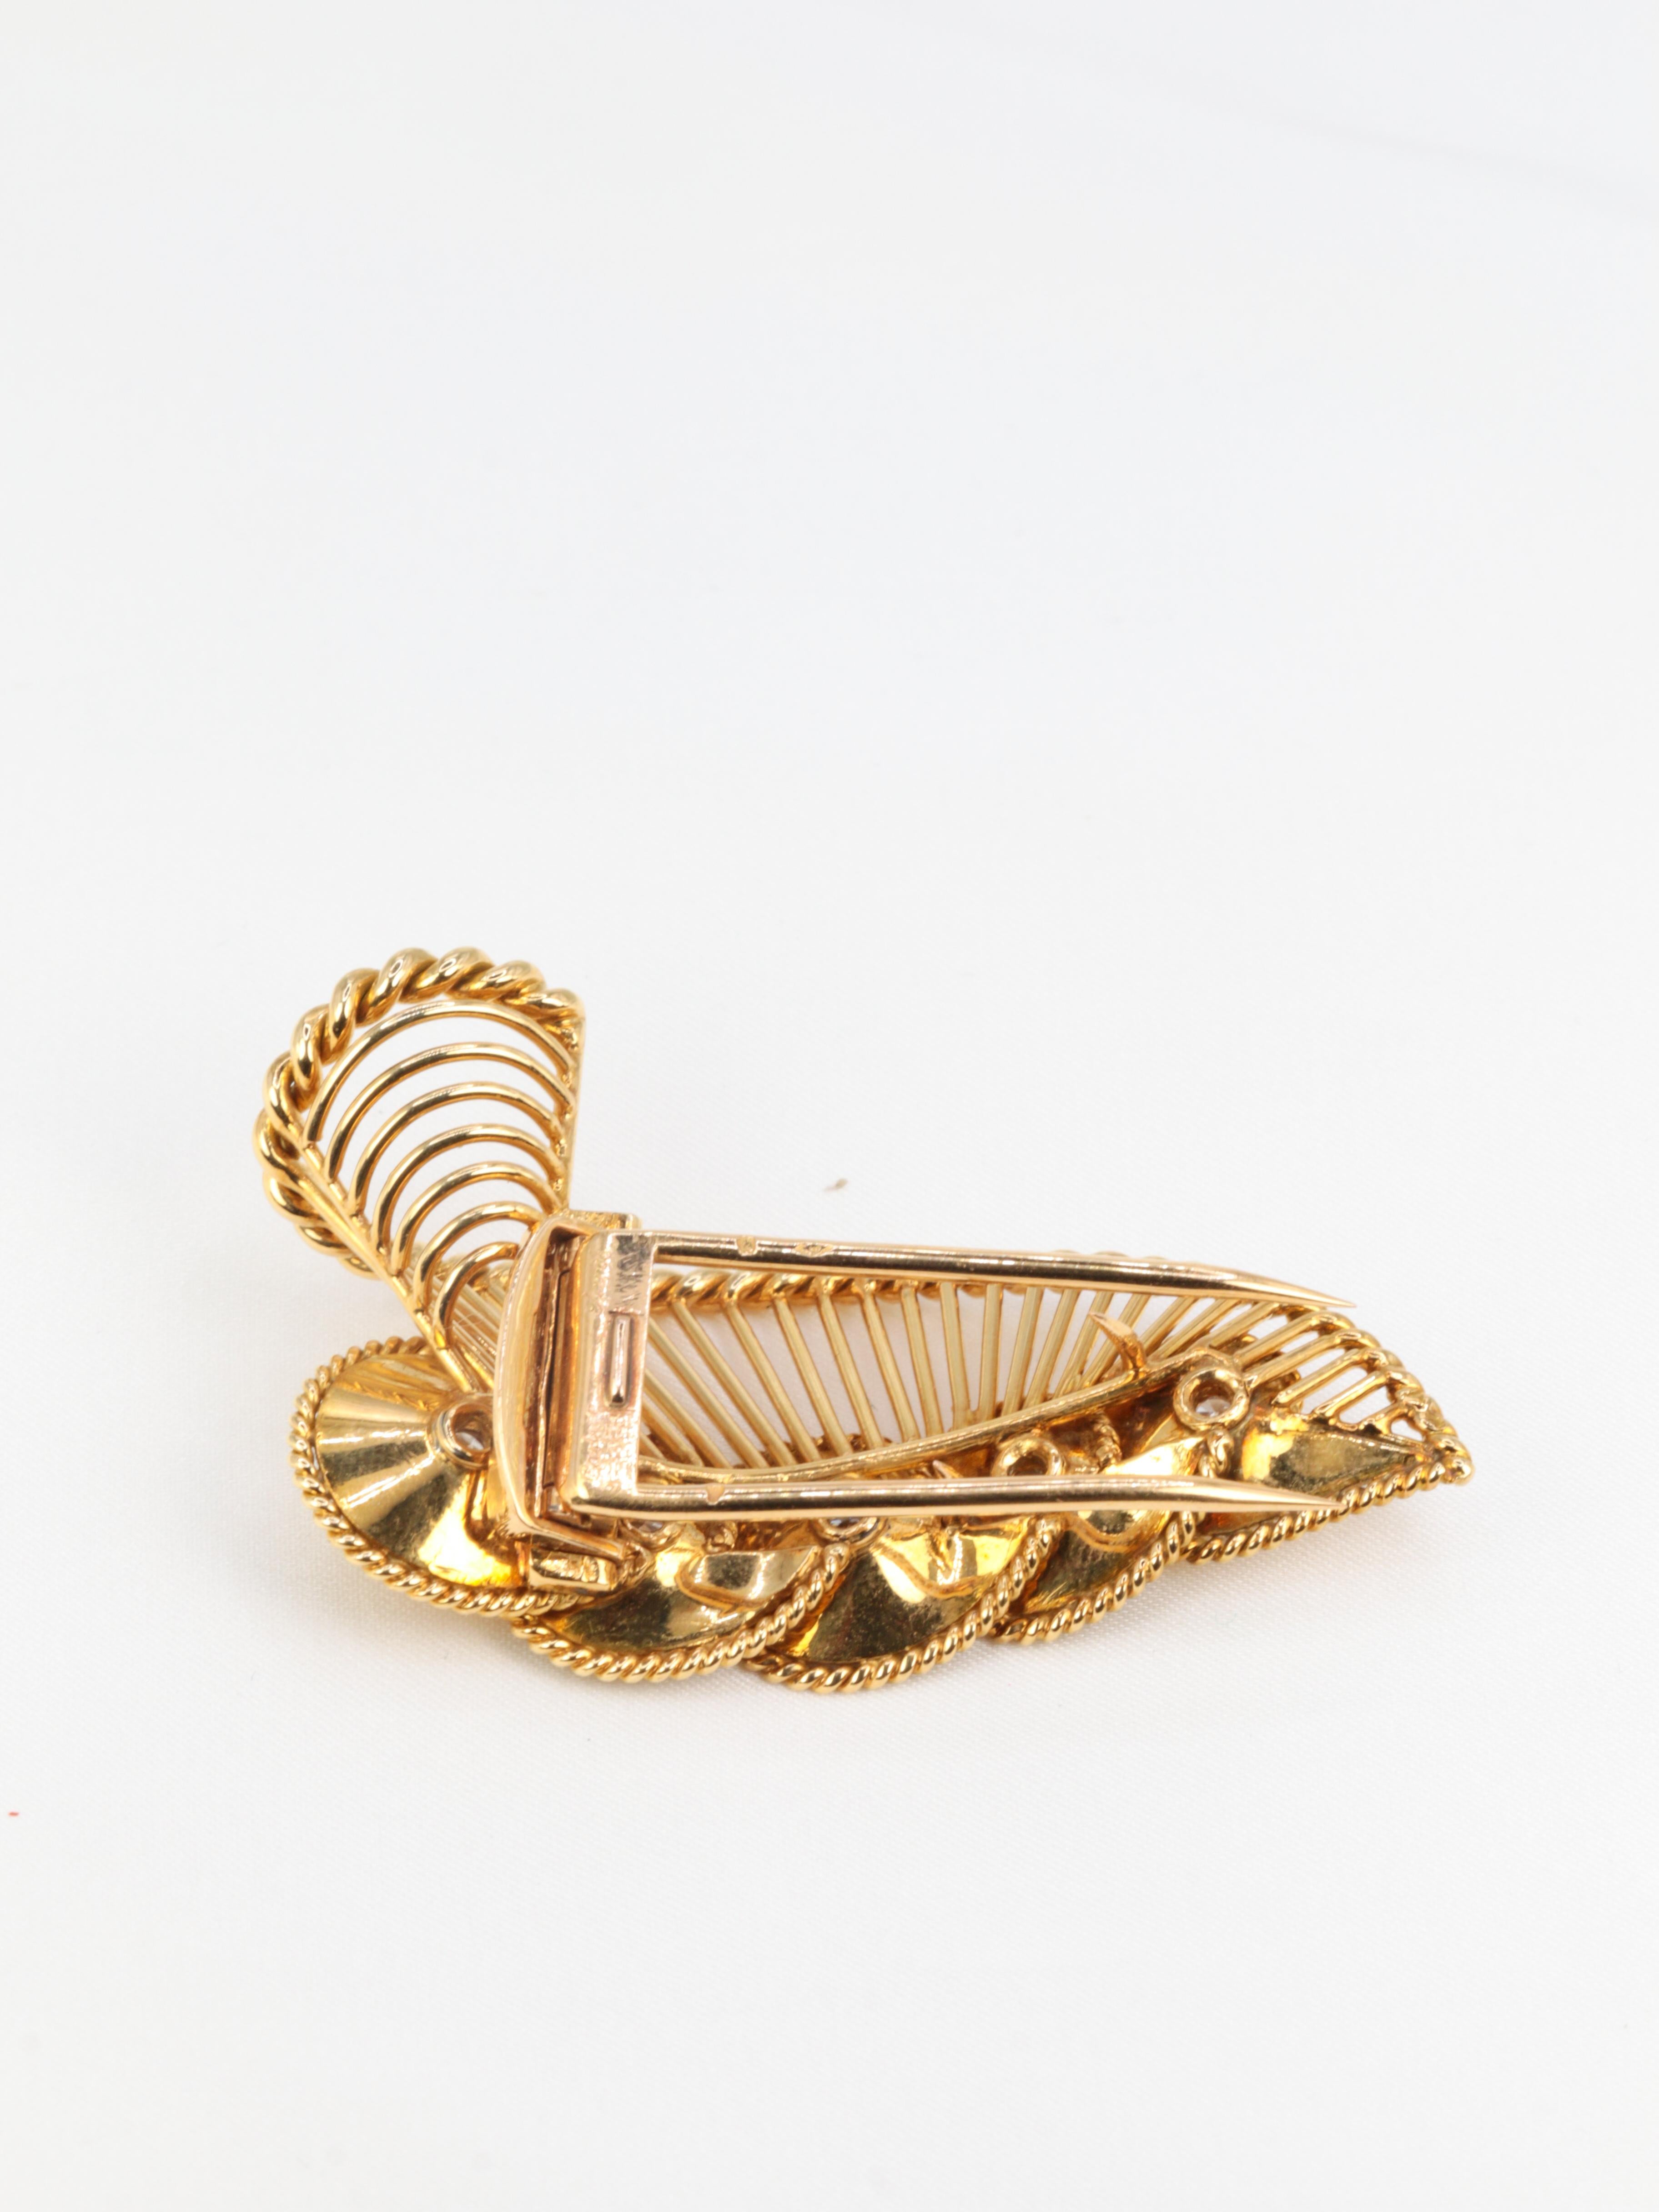 Gold Vintage Cartier Shell Brooch with Diamonds 2